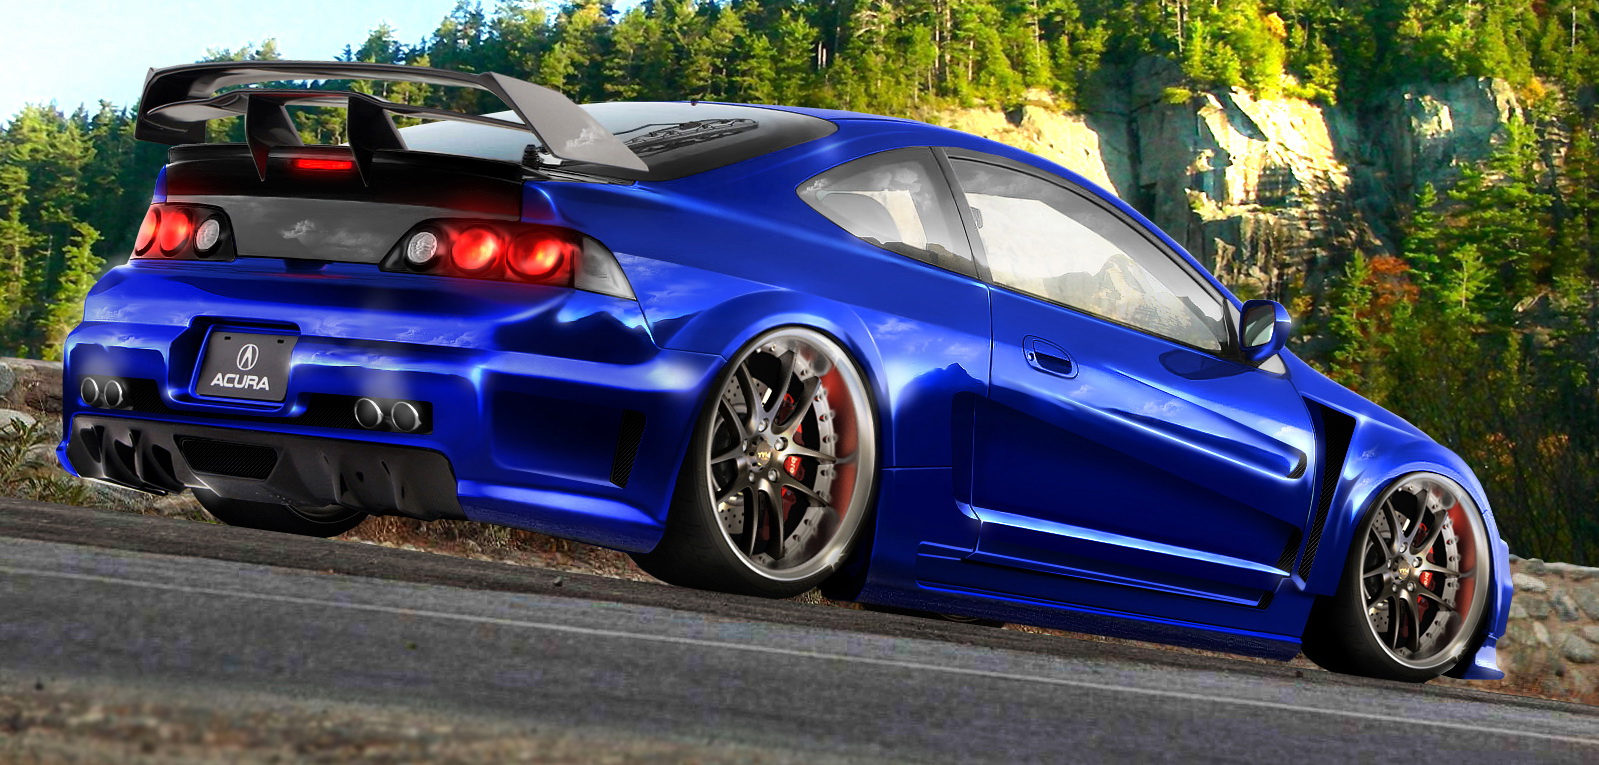 2009 Acura Rsx | Car photos and wallpapers